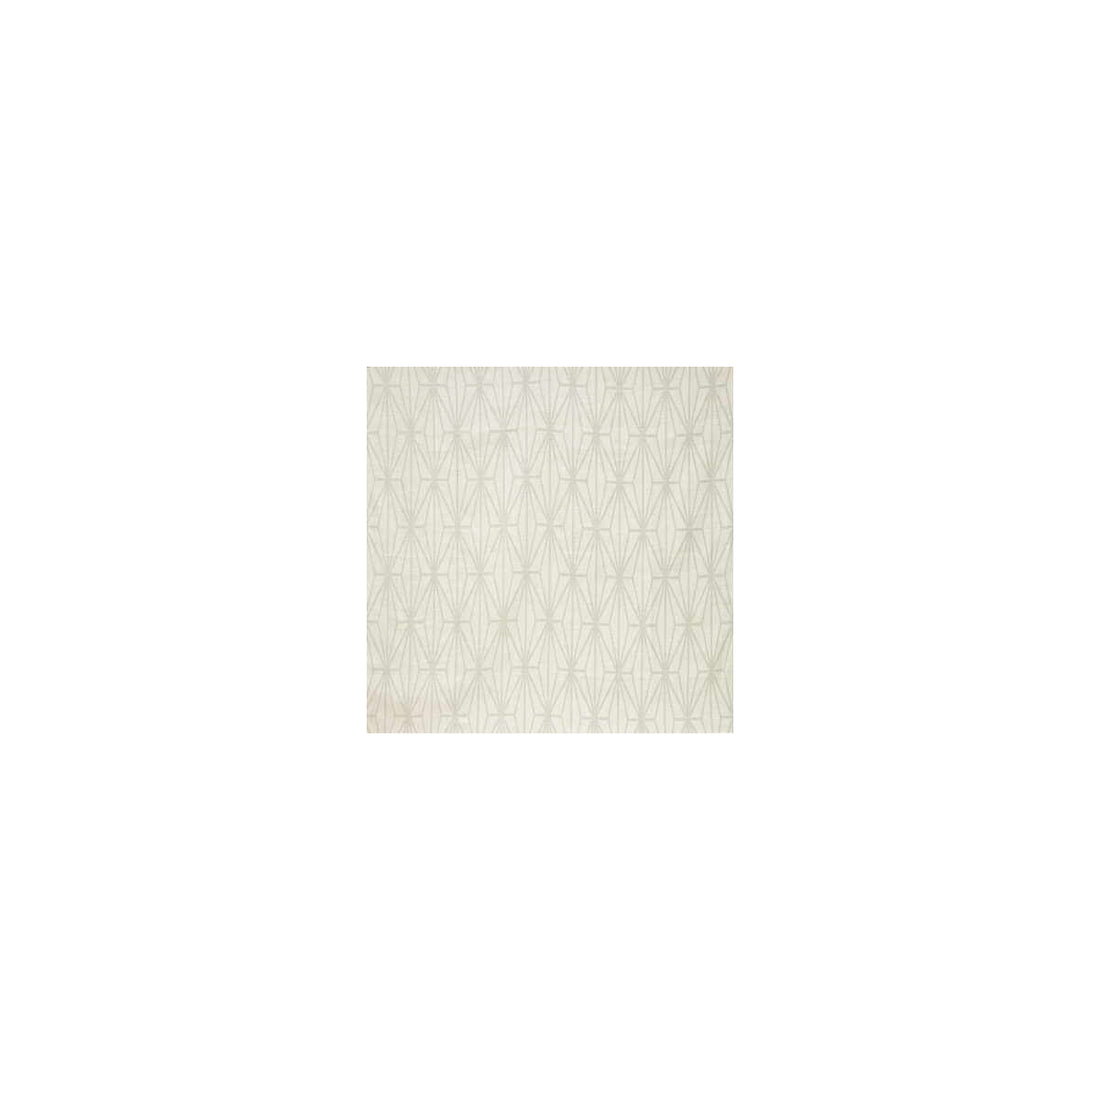 Katana fabric in cream/dove color - pattern GWF-2812.111.0 - by Lee Jofa Modern in the Kelly Wearstler collection